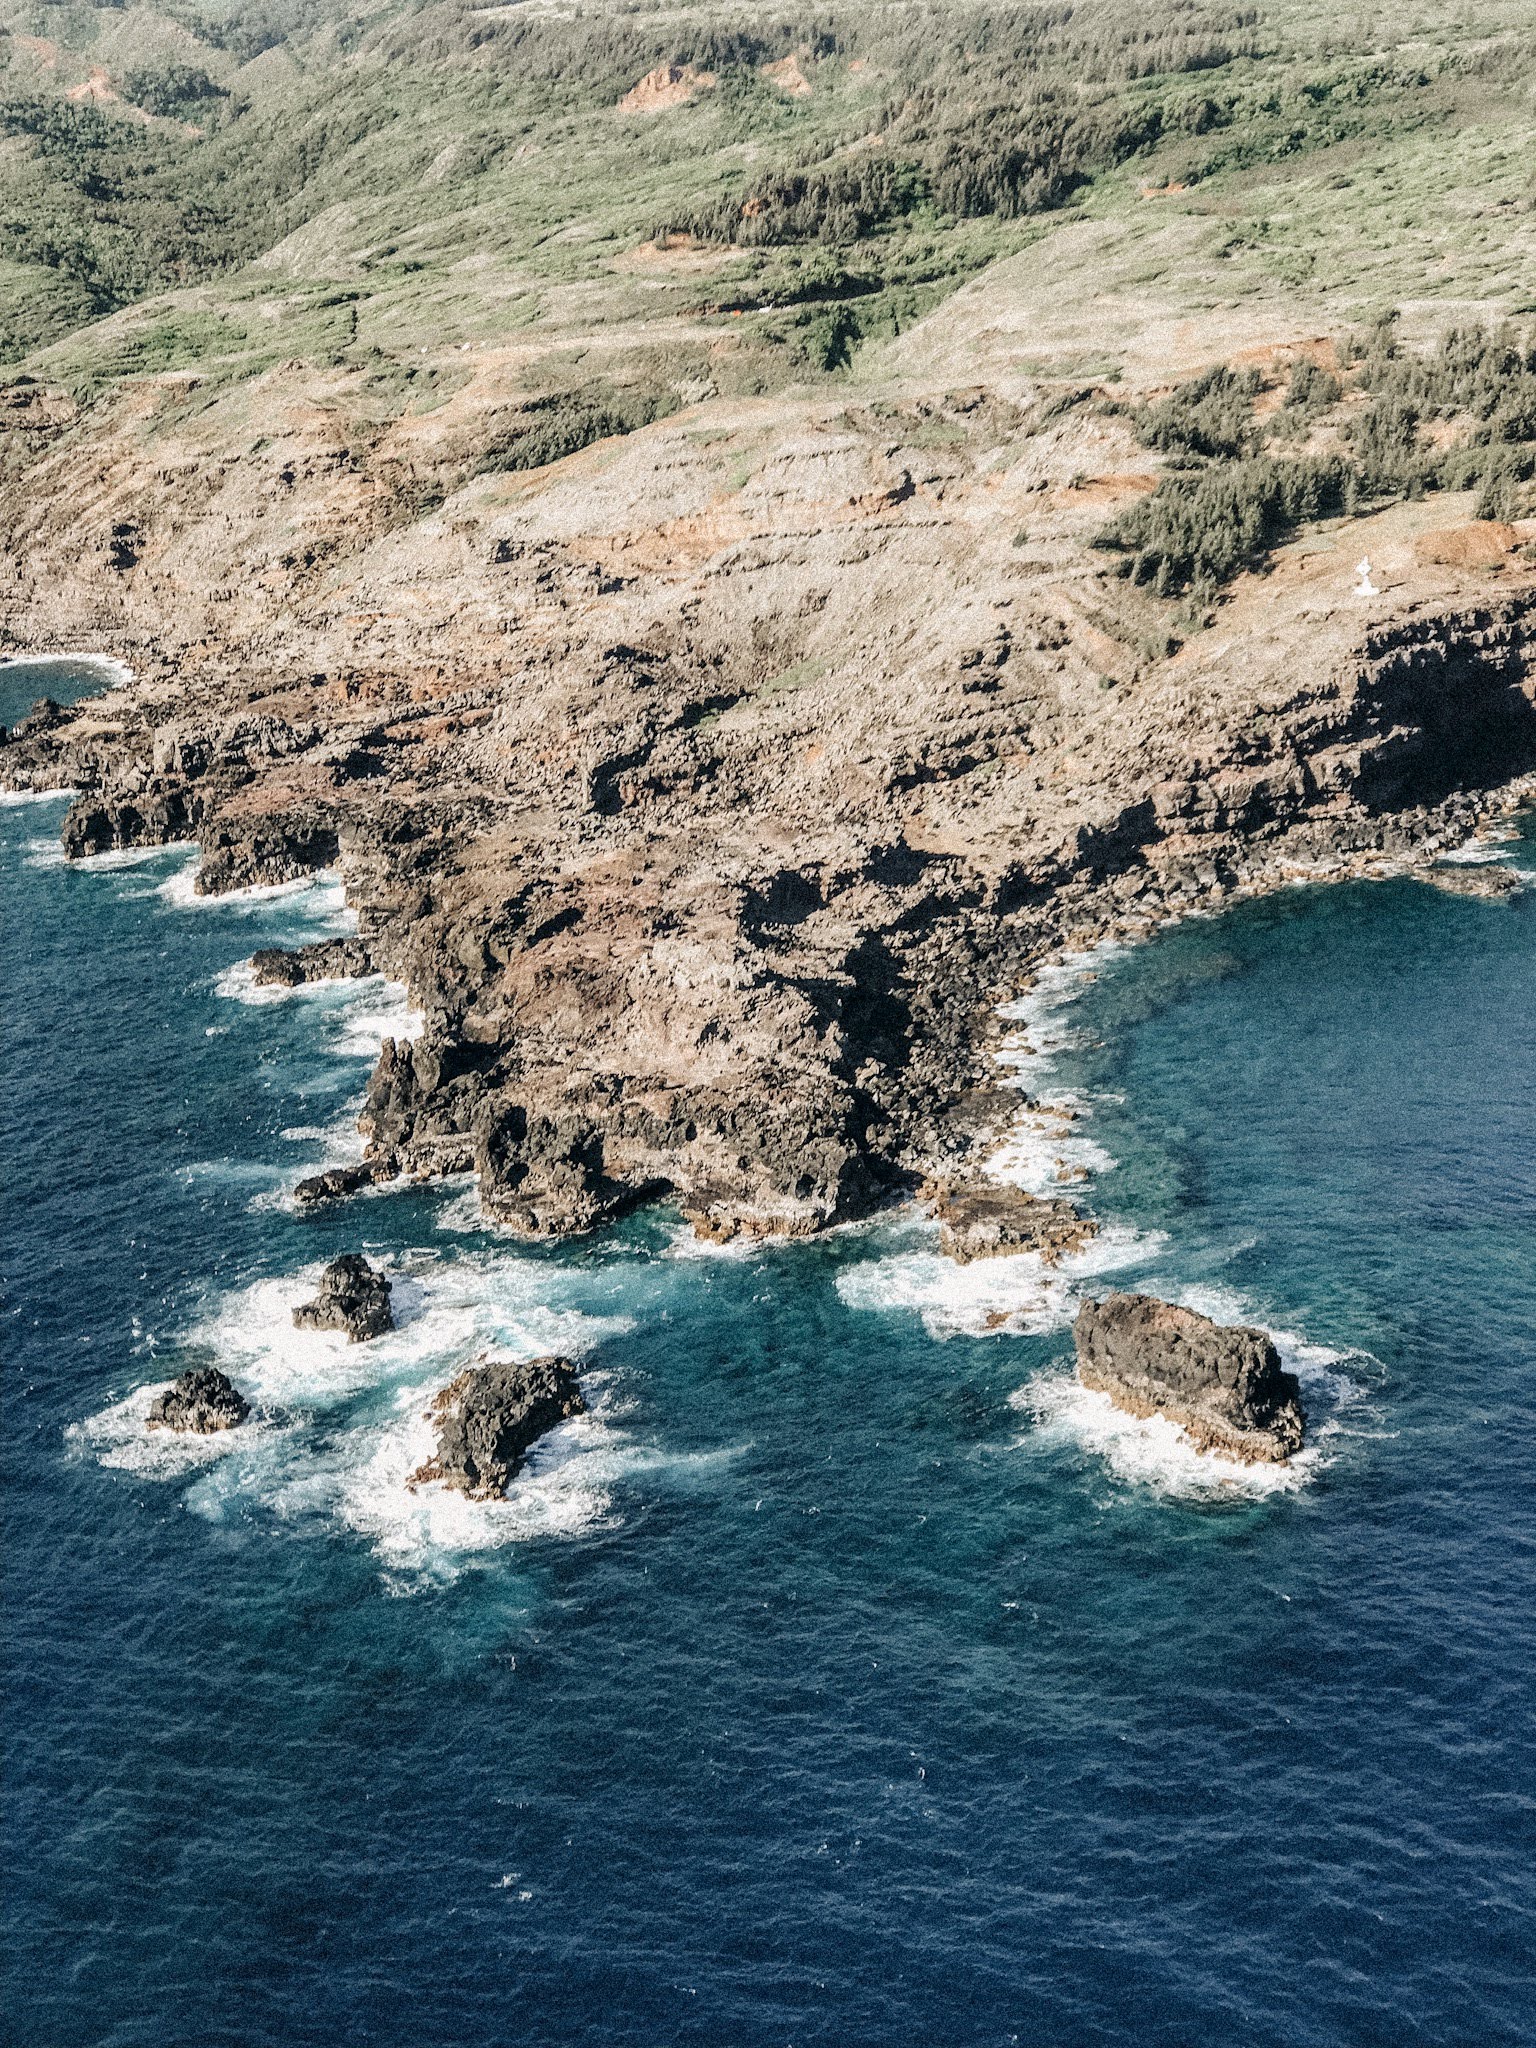 West Maui helicopter tour